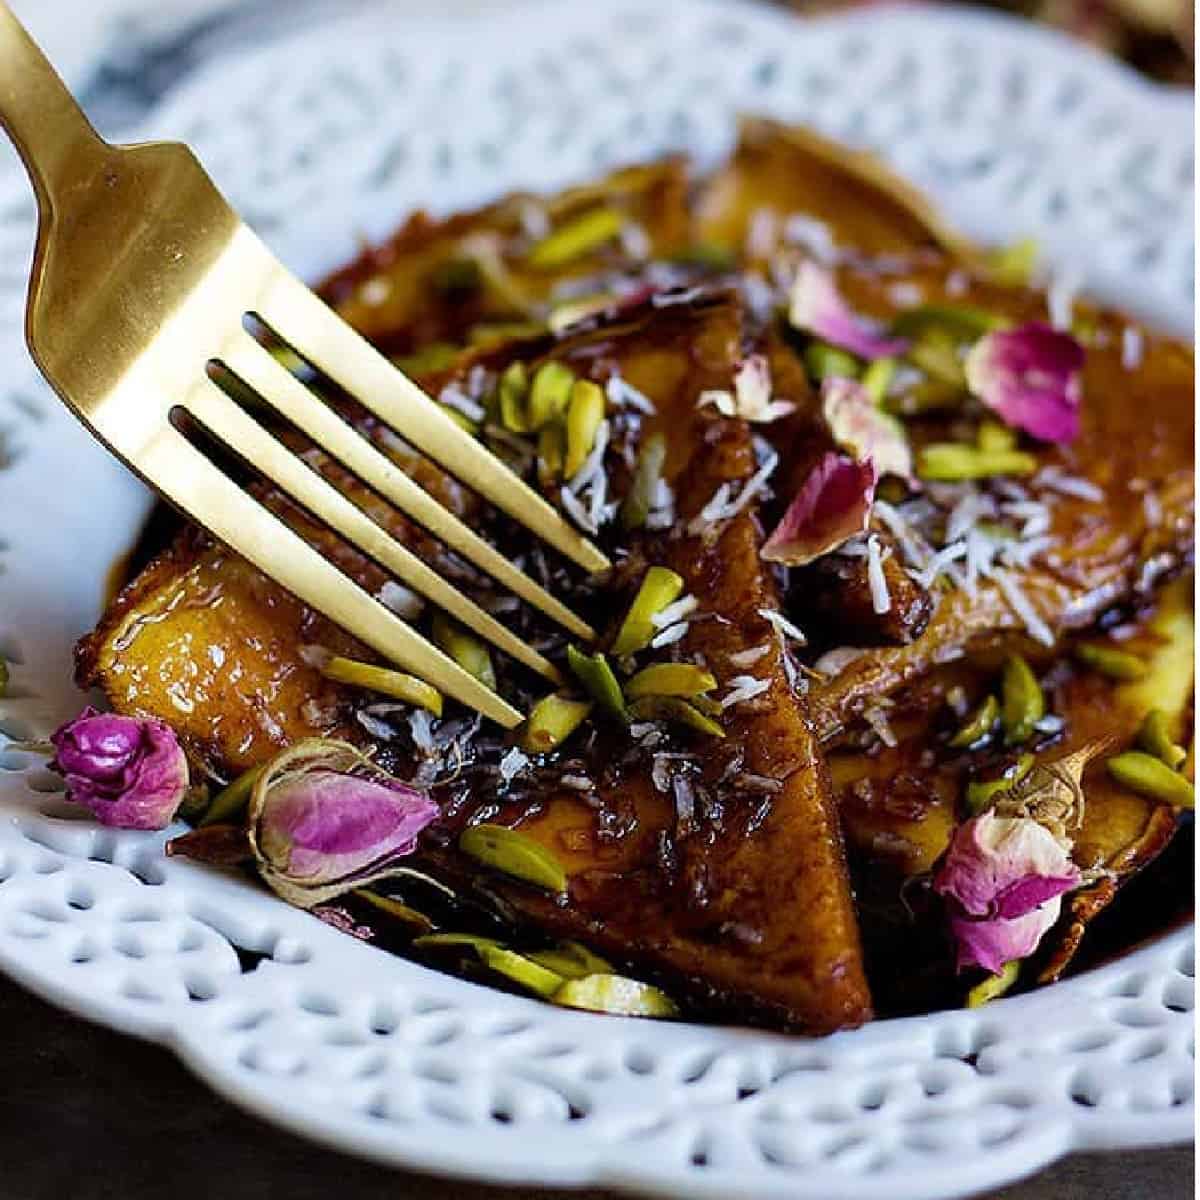 This Persian Homemade Crepe Recipe is one you'll want to remember. Cooked with molasses, this crepe is different from everything you've had before.
